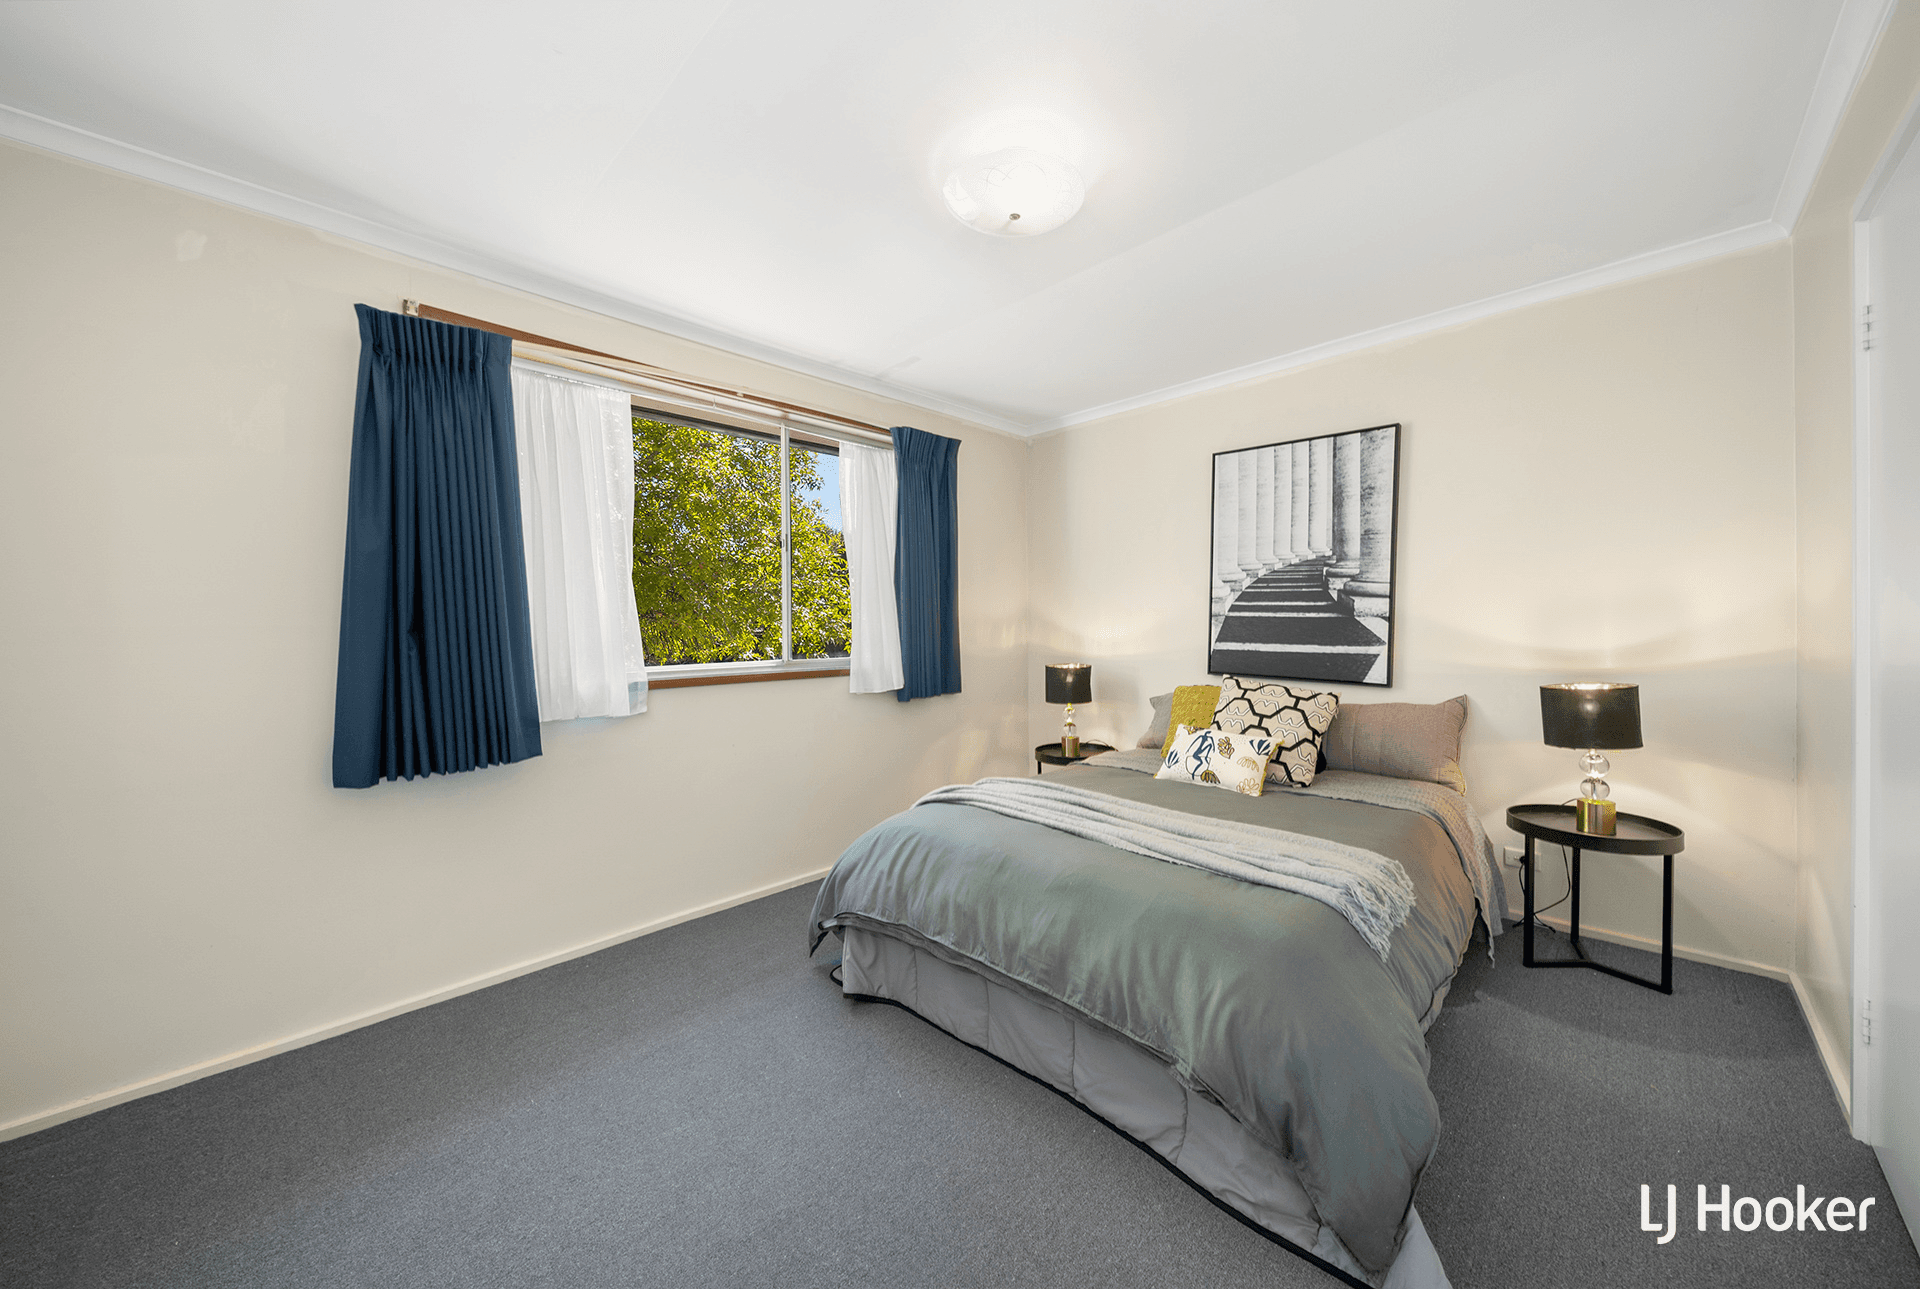 1 Holden Place, FLYNN, ACT 2615